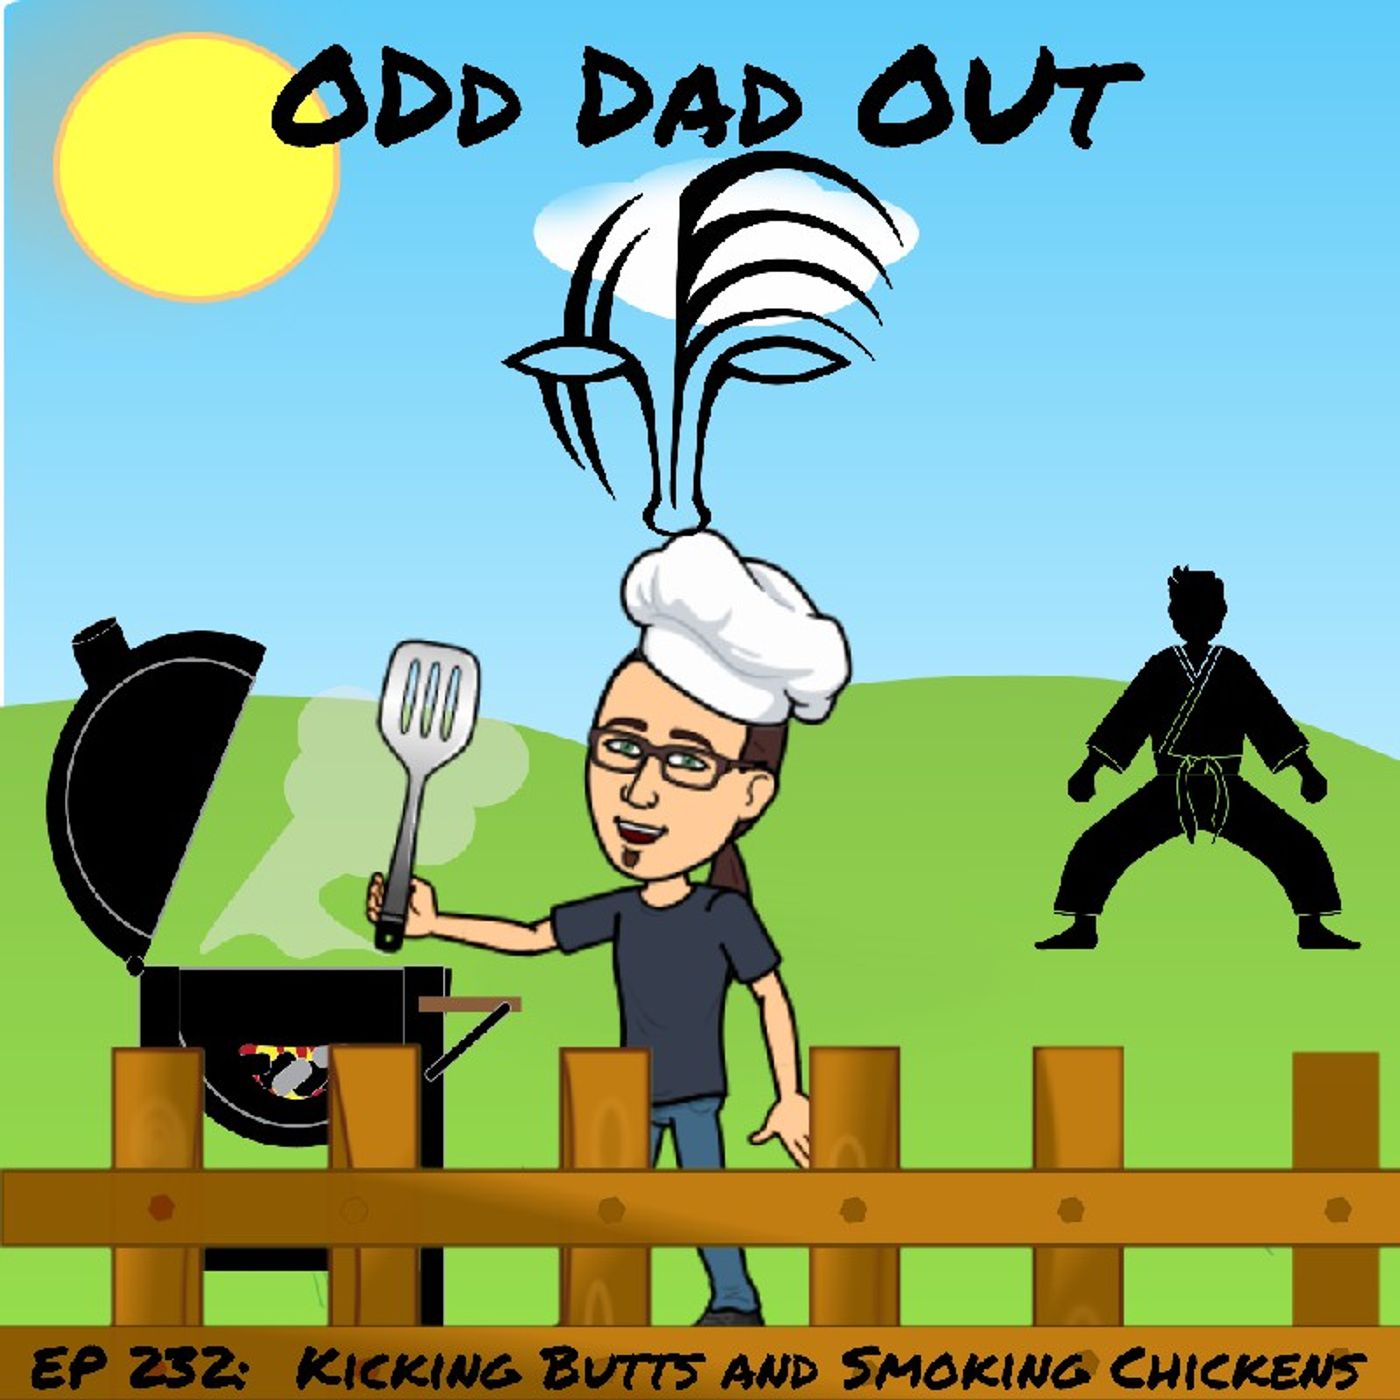 Kicking Butts and Smoking Chickens: ODO 232